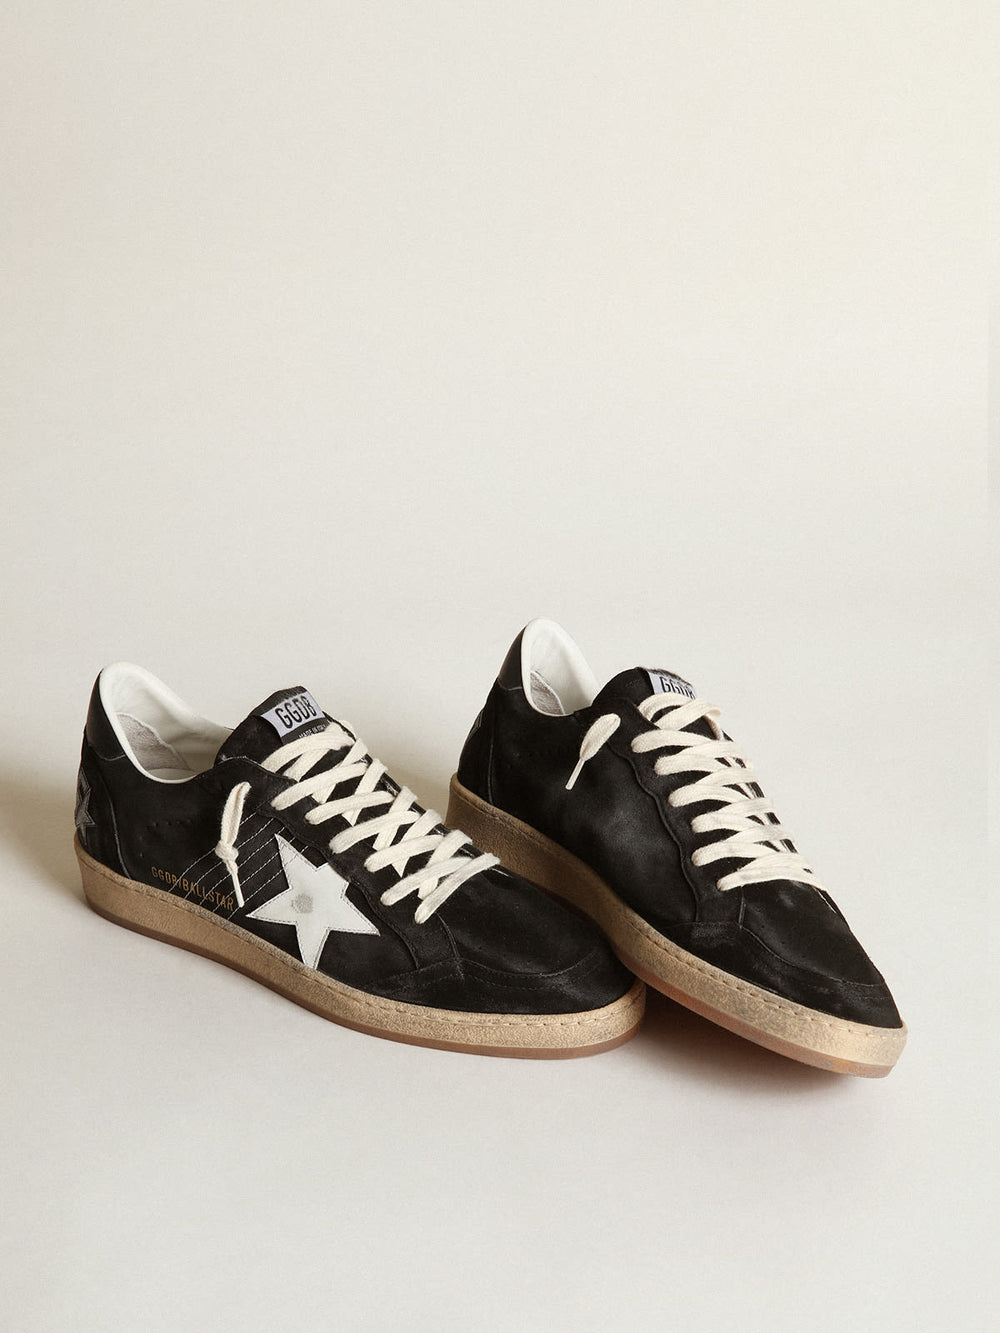 Ball Star in Black Suede w/ White Leather Star